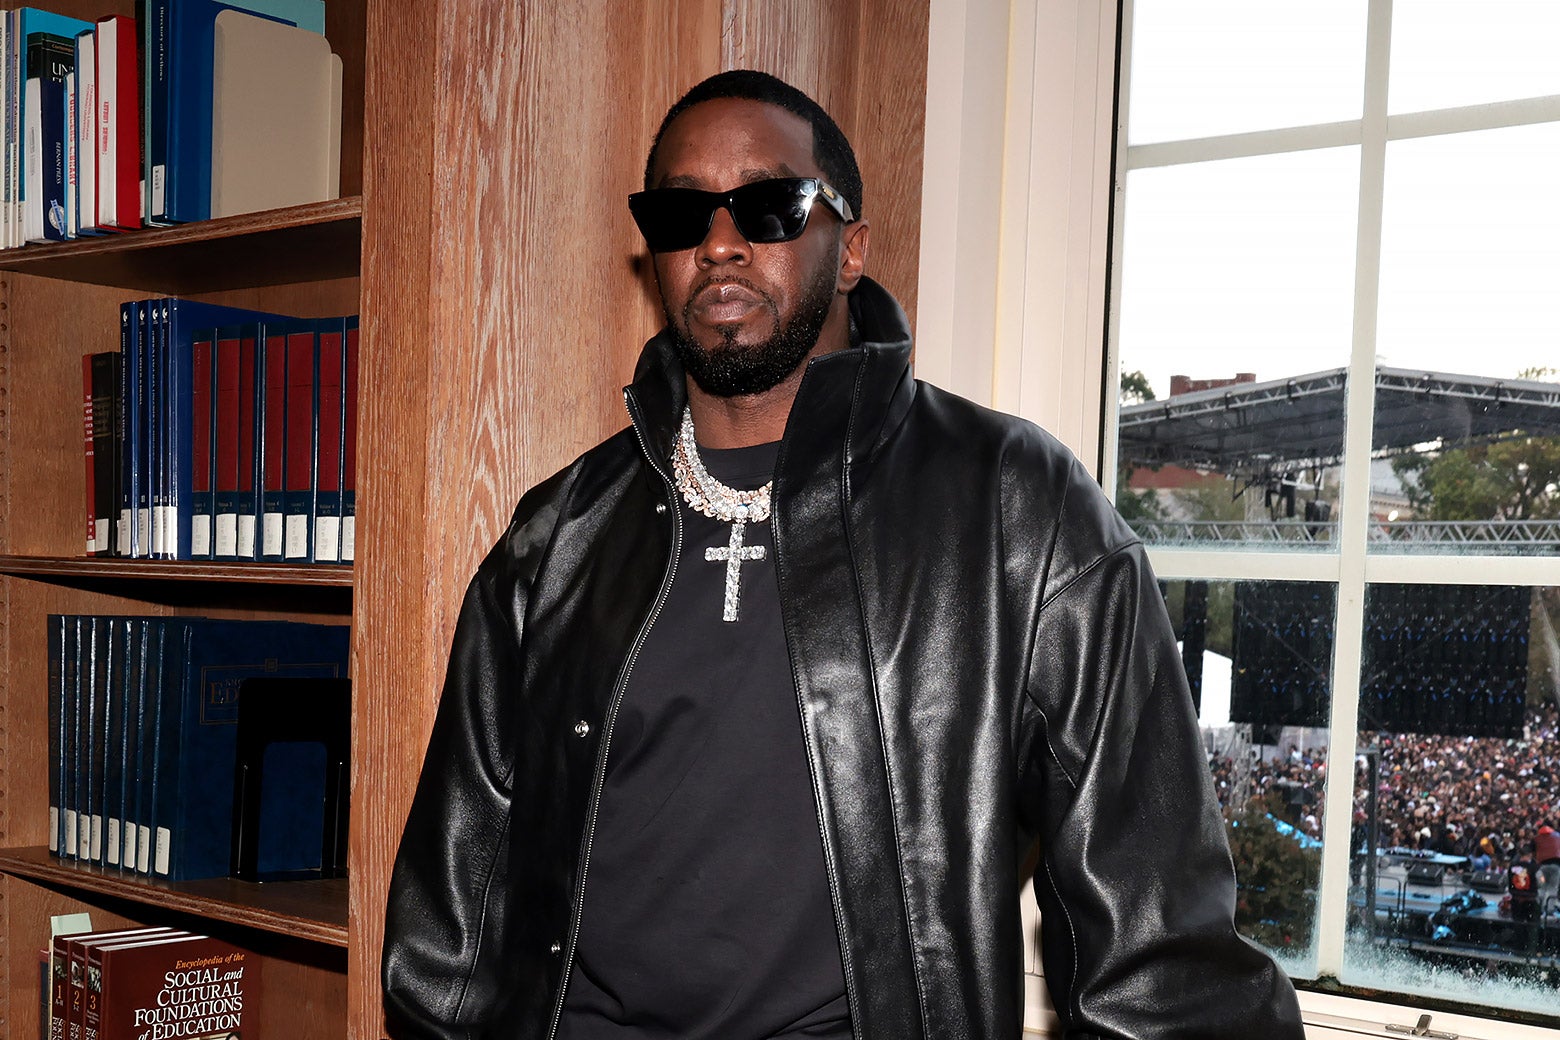 Puff Daddy lawsuit: Why Cassie's allegations against Sean Combs didn't  surprise me after my reporting on Tupac's death.